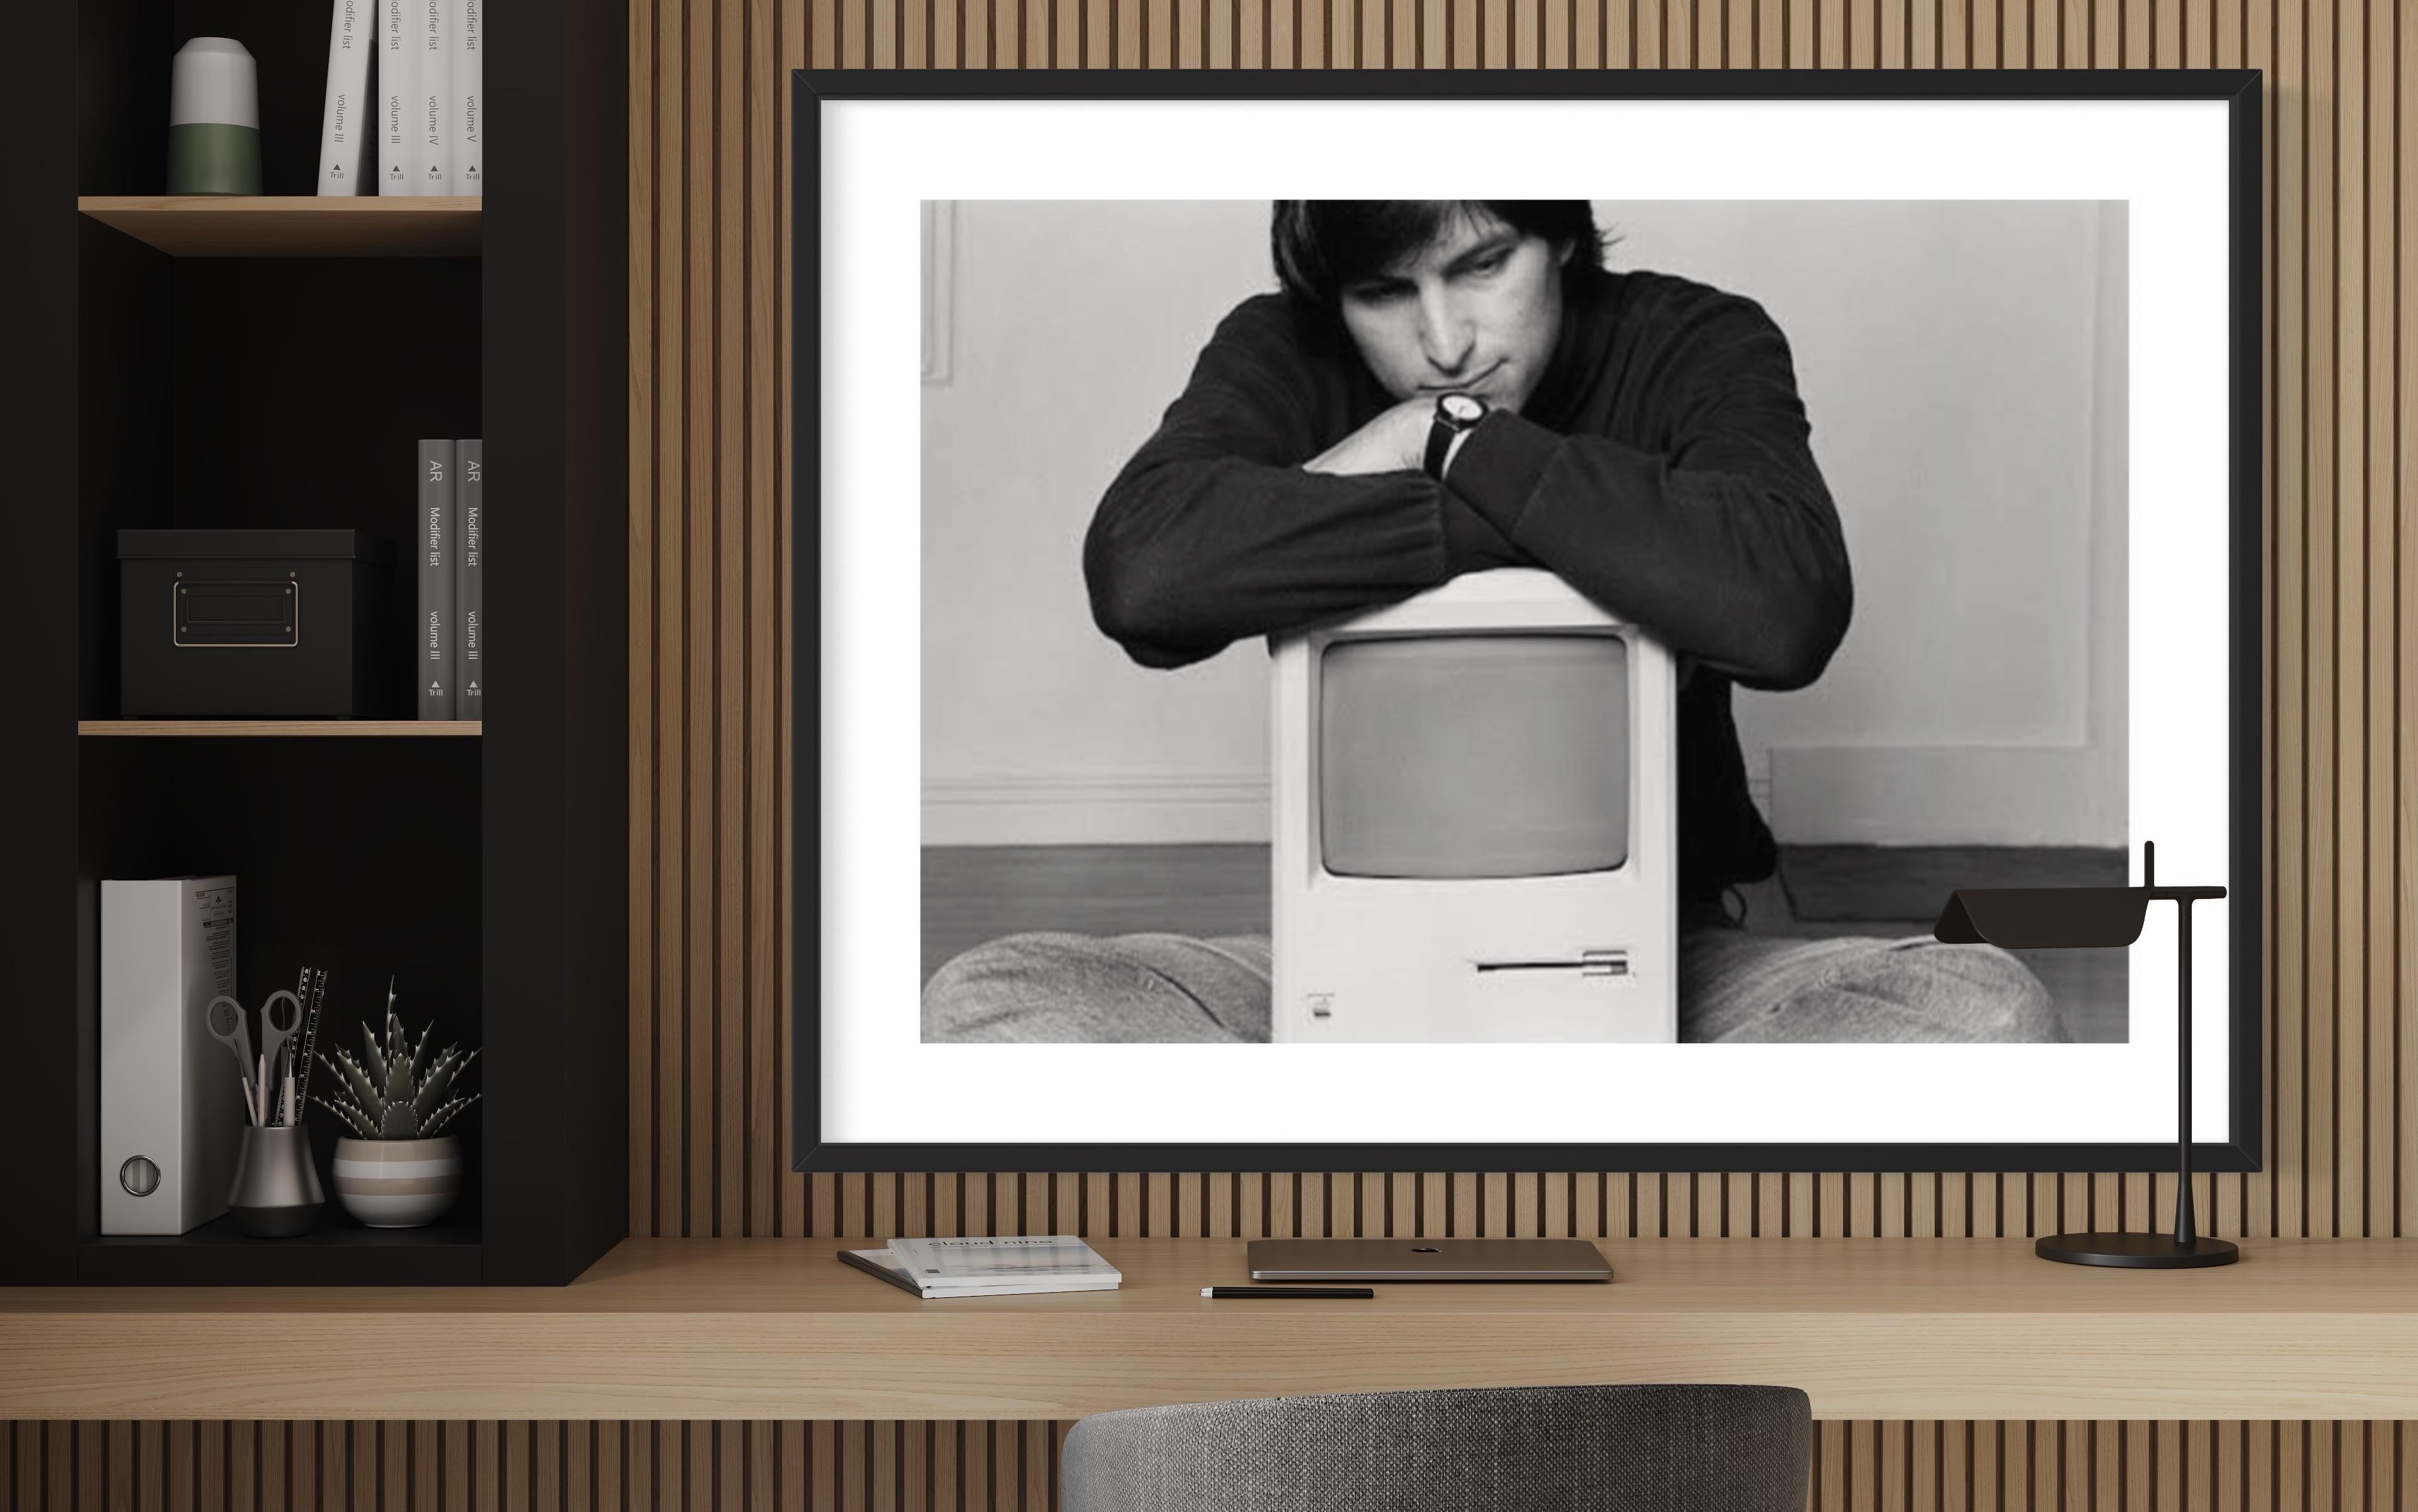 Steve Jobs, Reflecting Mac 1984 - Contemporary Photograph by Norman Seeff